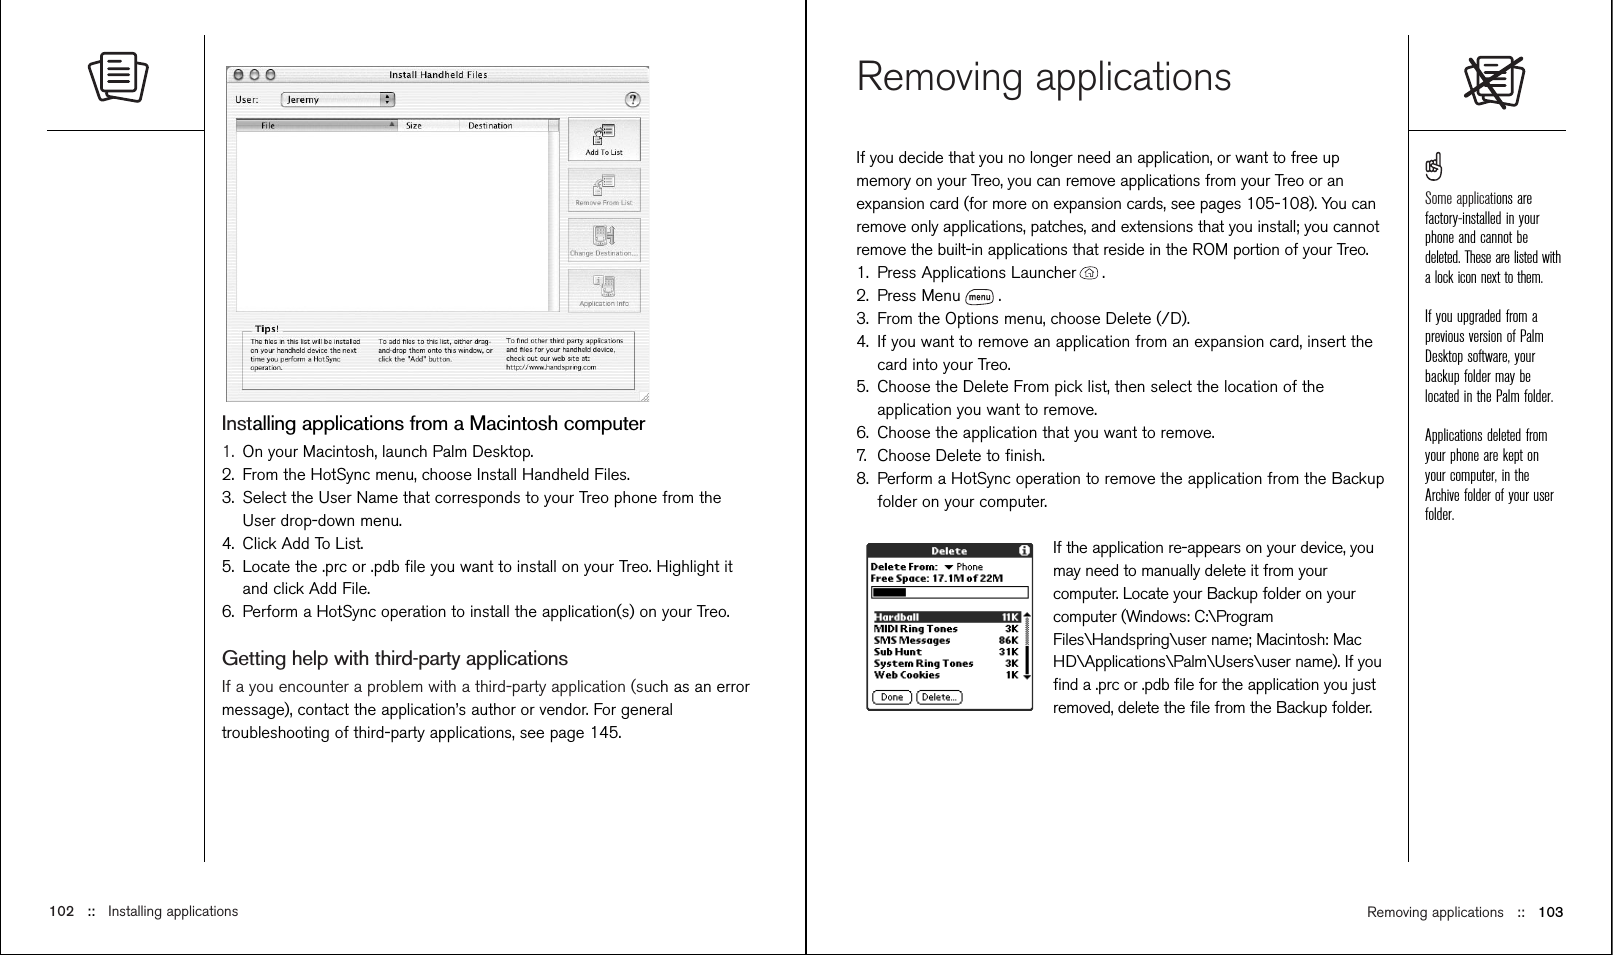 Removing applications ::   103Removing applicationsIf you decide that you no longer need an application, or want to free upmemory on your Treo, you can remove applications from your Treo or anexpansion card (for more on expansion cards, see pages 105-108). You canremove only applications, patches, and extensions that you install; you cannotremove the built-in applications that reside in the ROM portion of your Treo.1. Press Applications Launcher . 2. Press Menu .3. From the Options menu, choose Delete (/D).4. If you want to remove an application from an expansion card, insert thecard into your Treo.5. Choose the Delete From pick list, then select the location of theapplication you want to remove.6. Choose the application that you want to remove.7. Choose Delete to ﬁnish.8. Perform a HotSync operation to remove the application from the Backupfolder on your computer.If the application re-appears on your device, youmay need to manually delete it from yourcomputer. Locate your Backup folder on yourcomputer (Windows: C:\ProgramFiles\Handspring\user name; Macintosh: MacHD\Applications\Palm\Users\user name). If youﬁnd a .prc or .pdb ﬁle for the application you justremoved, delete the ﬁle from the Backup folder.Installing applications from a Macintosh computer1. On your Macintosh, launch Palm Desktop.2. From the HotSync menu, choose Install Handheld Files.3. Select the User Name that corresponds to your Treo phone from theUser drop-down menu.4. Click Add To List.5. Locate the .prc or .pdb ﬁle you want to install on your Treo. Highlight itand click Add File.6. Perform a HotSync operation to install the application(s) on your Treo.Getting help with third-party applicationsIf a you encounter a problem with a third-party application (such as an errormessage), contact the application’s author or vendor. For generaltroubleshooting of third-party applications, see page 145. 102 ::   Installing applicationsSome applications arefactory-installed in yourphone and cannot bedeleted. These are listed witha lock icon next to them.If you upgraded from aprevious version of PalmDesktop software, yourbackup folder may belocated in the Palm folder.Applications deleted fromyour phone are kept onyour computer, in theArchive folder of your userfolder.